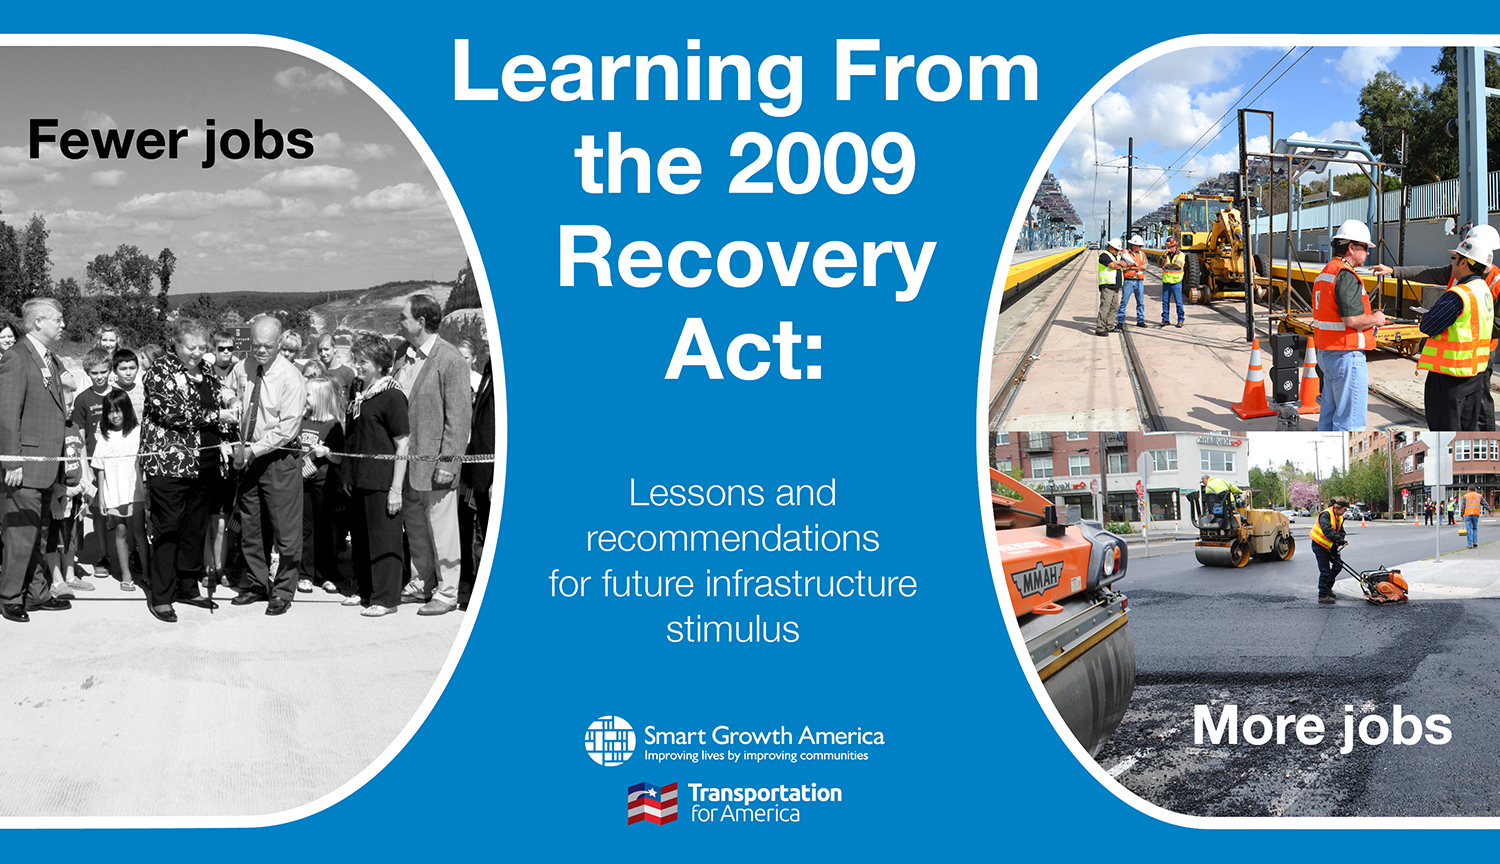 Learning from the 2009 Recovery Act